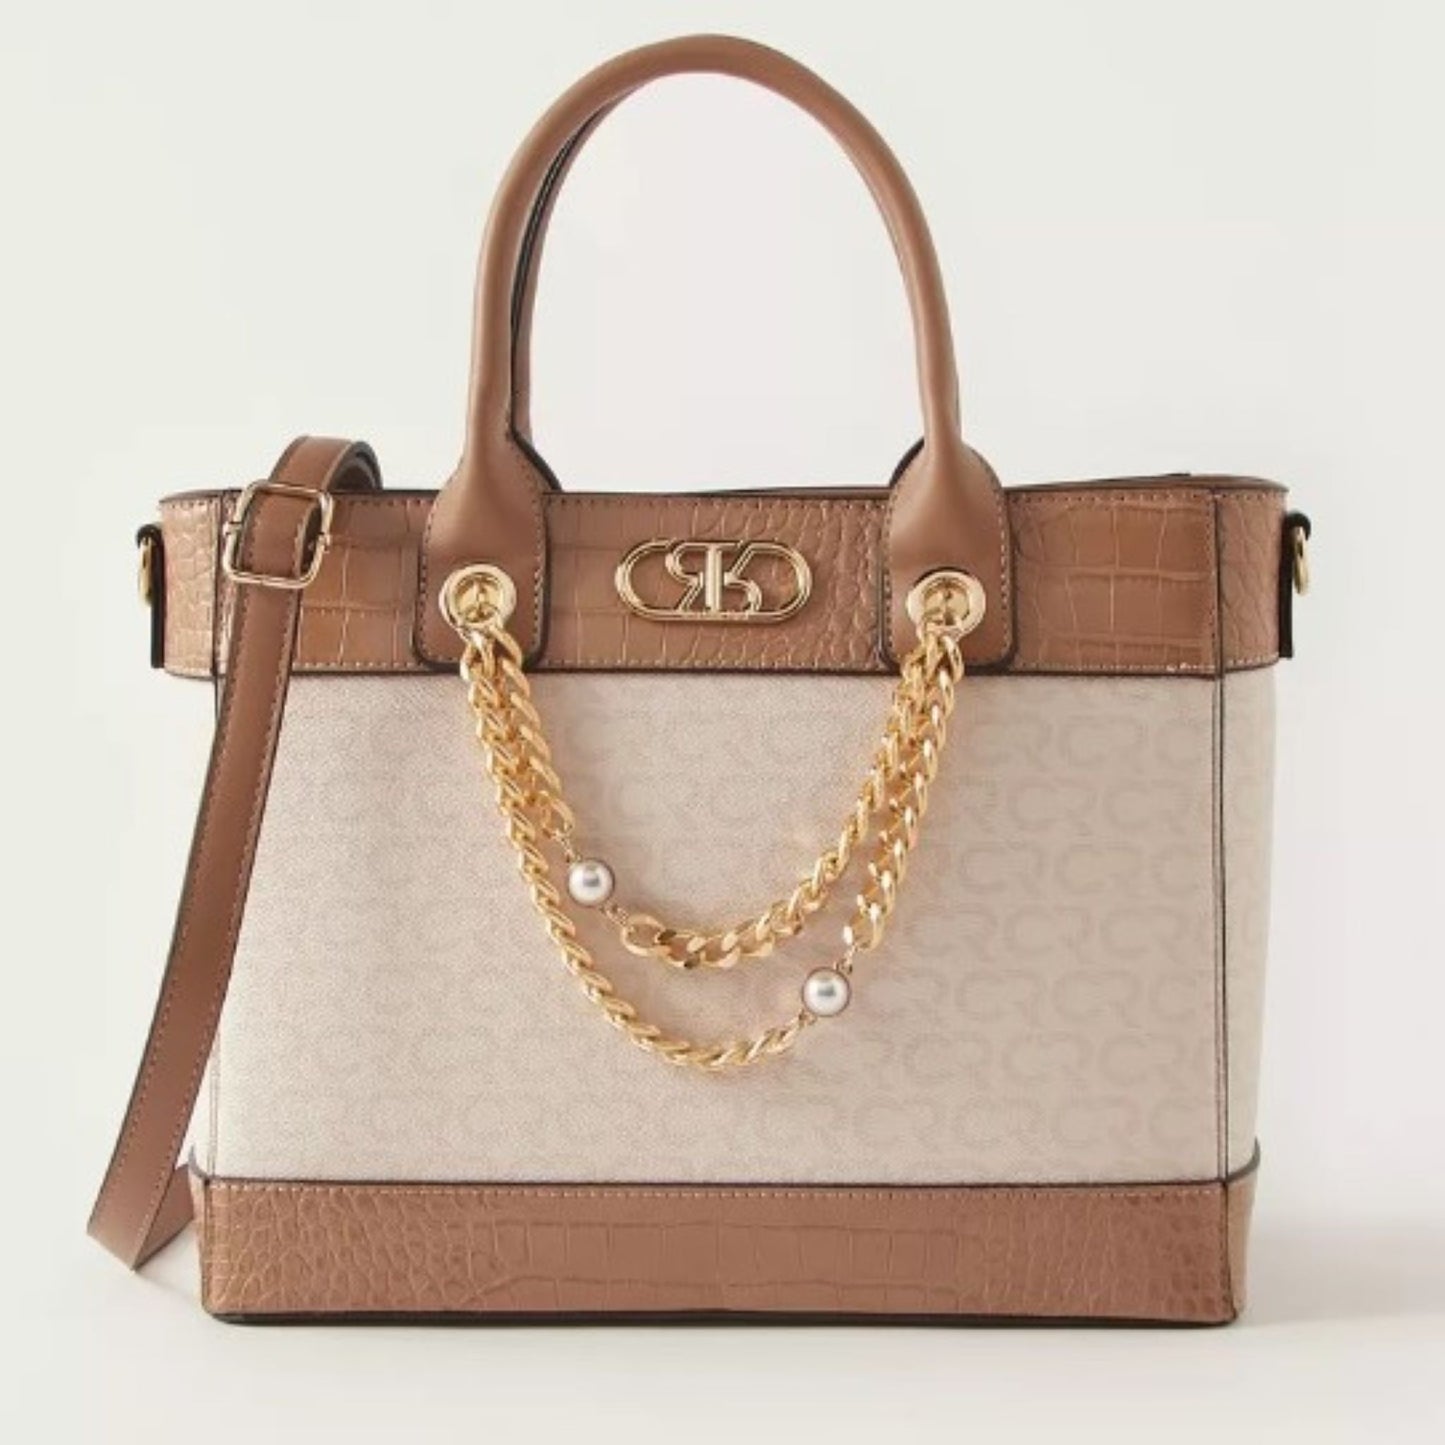 Beige and Tan Textured Top Handle Satchel Tote Bag with Chain Accent